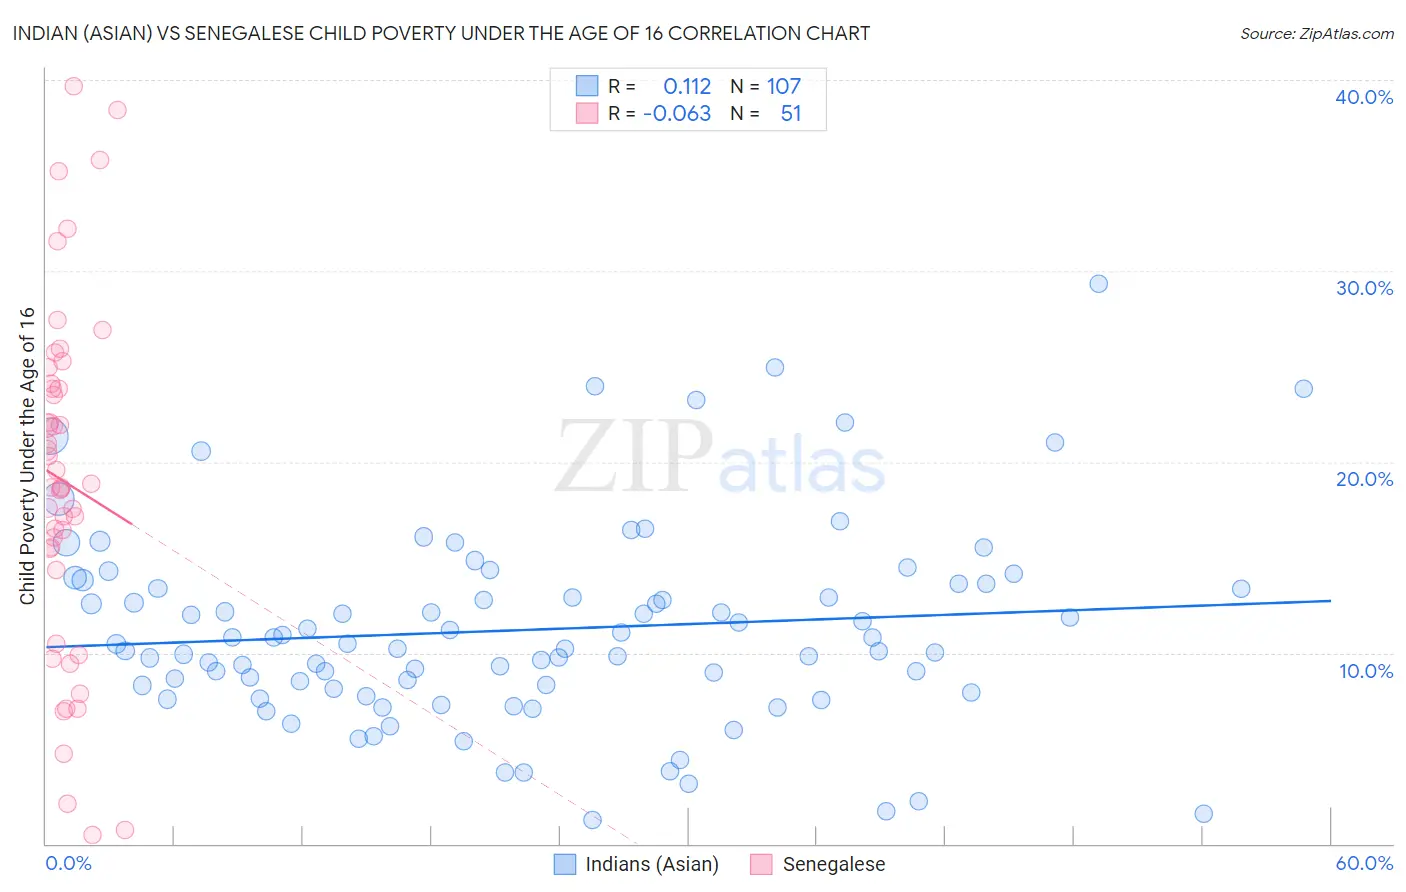 Indian (Asian) vs Senegalese Child Poverty Under the Age of 16